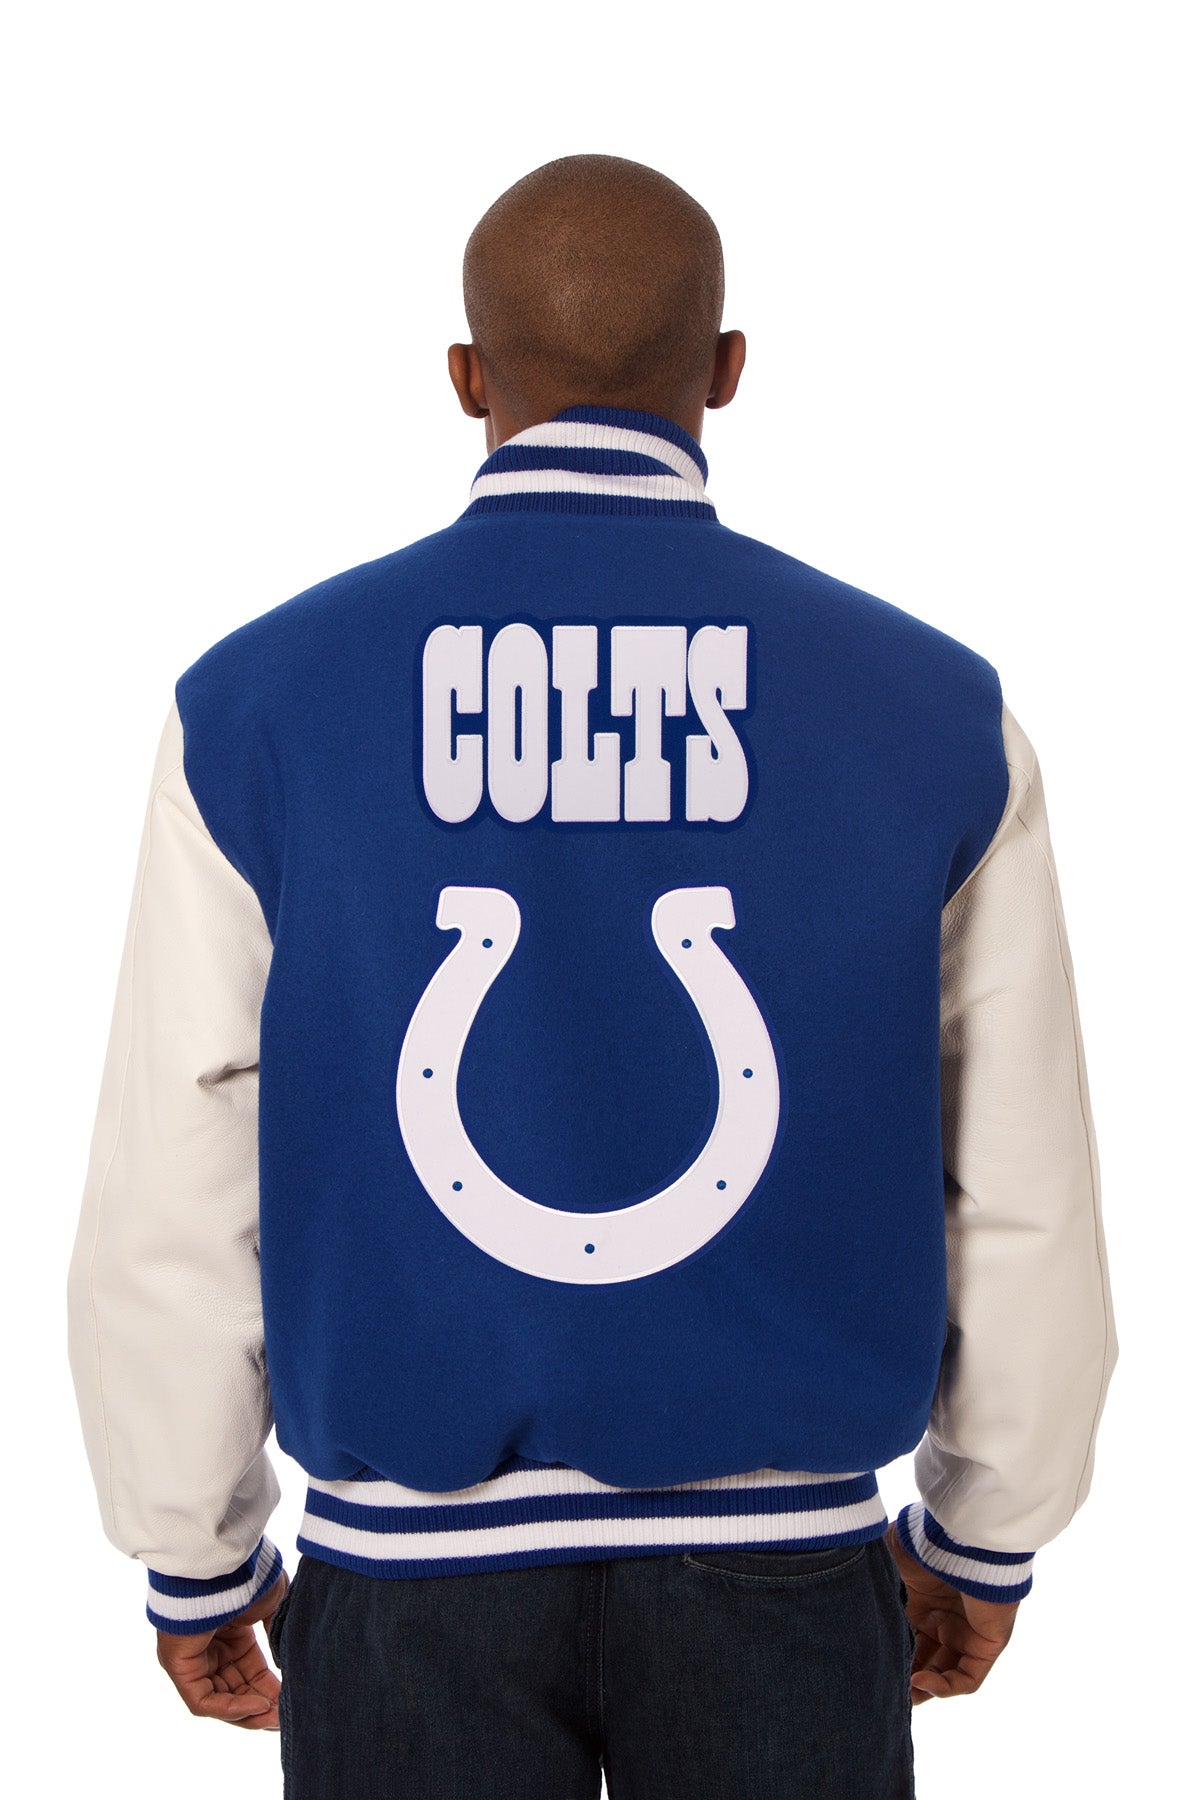 Indianapolis Colts Embroidered Wool and Leather Jacket